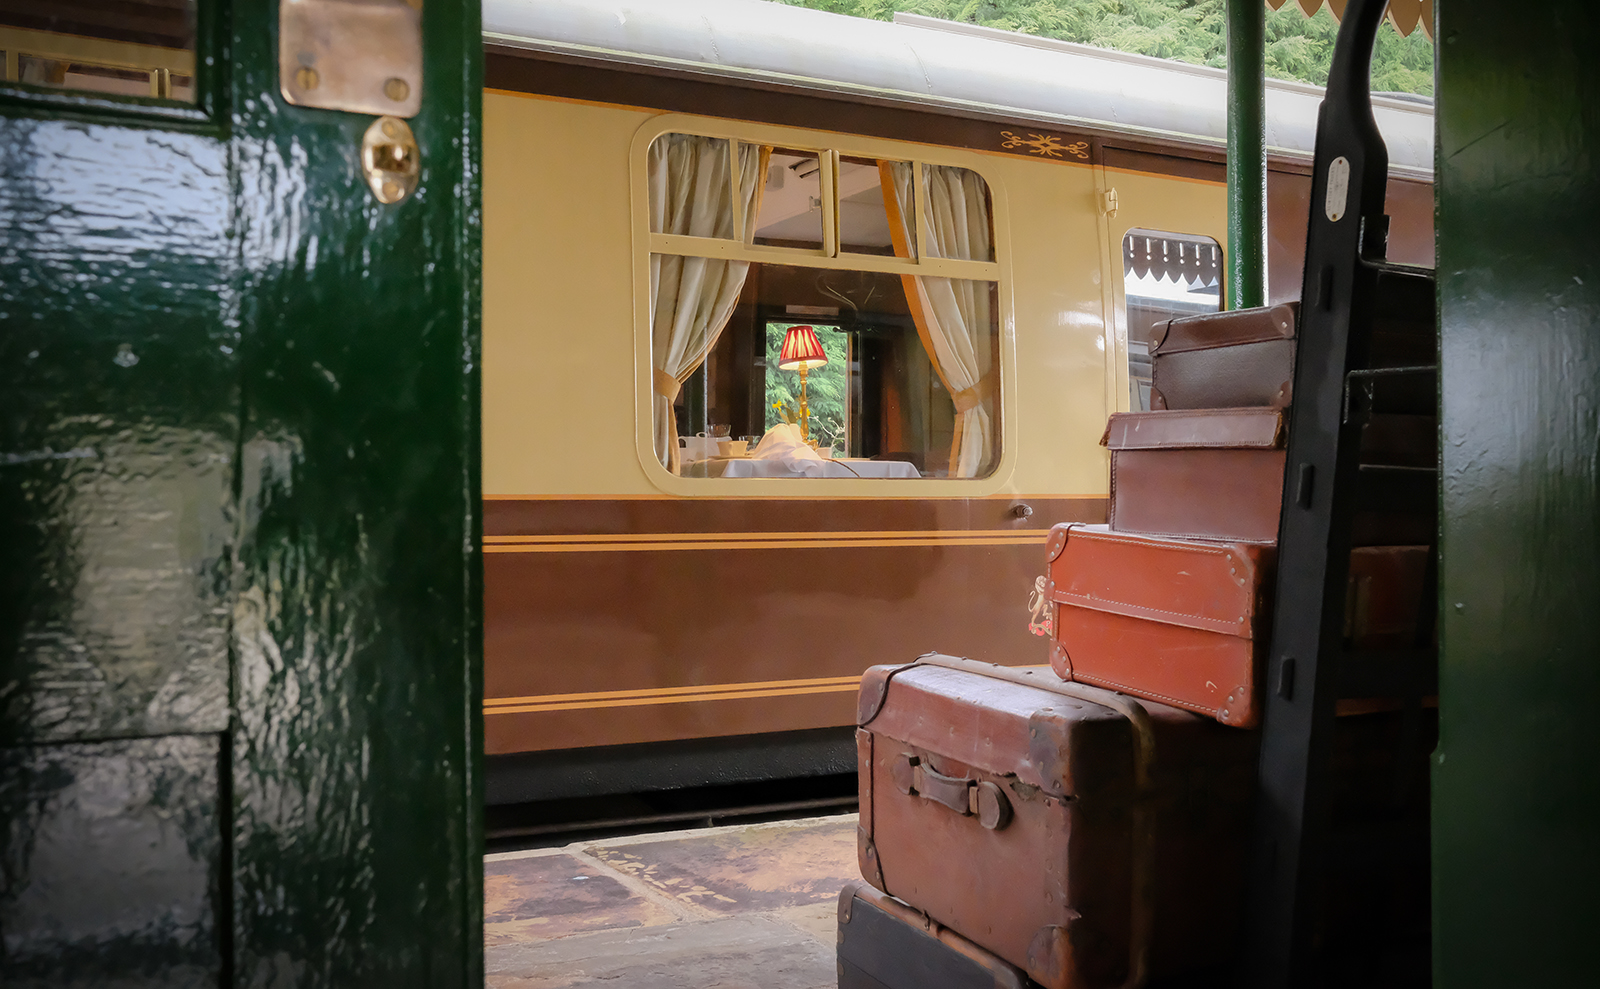 Gourmet Meals, Champagne, and Adventure Aboard a Vintage Train in 'The Dining Car'